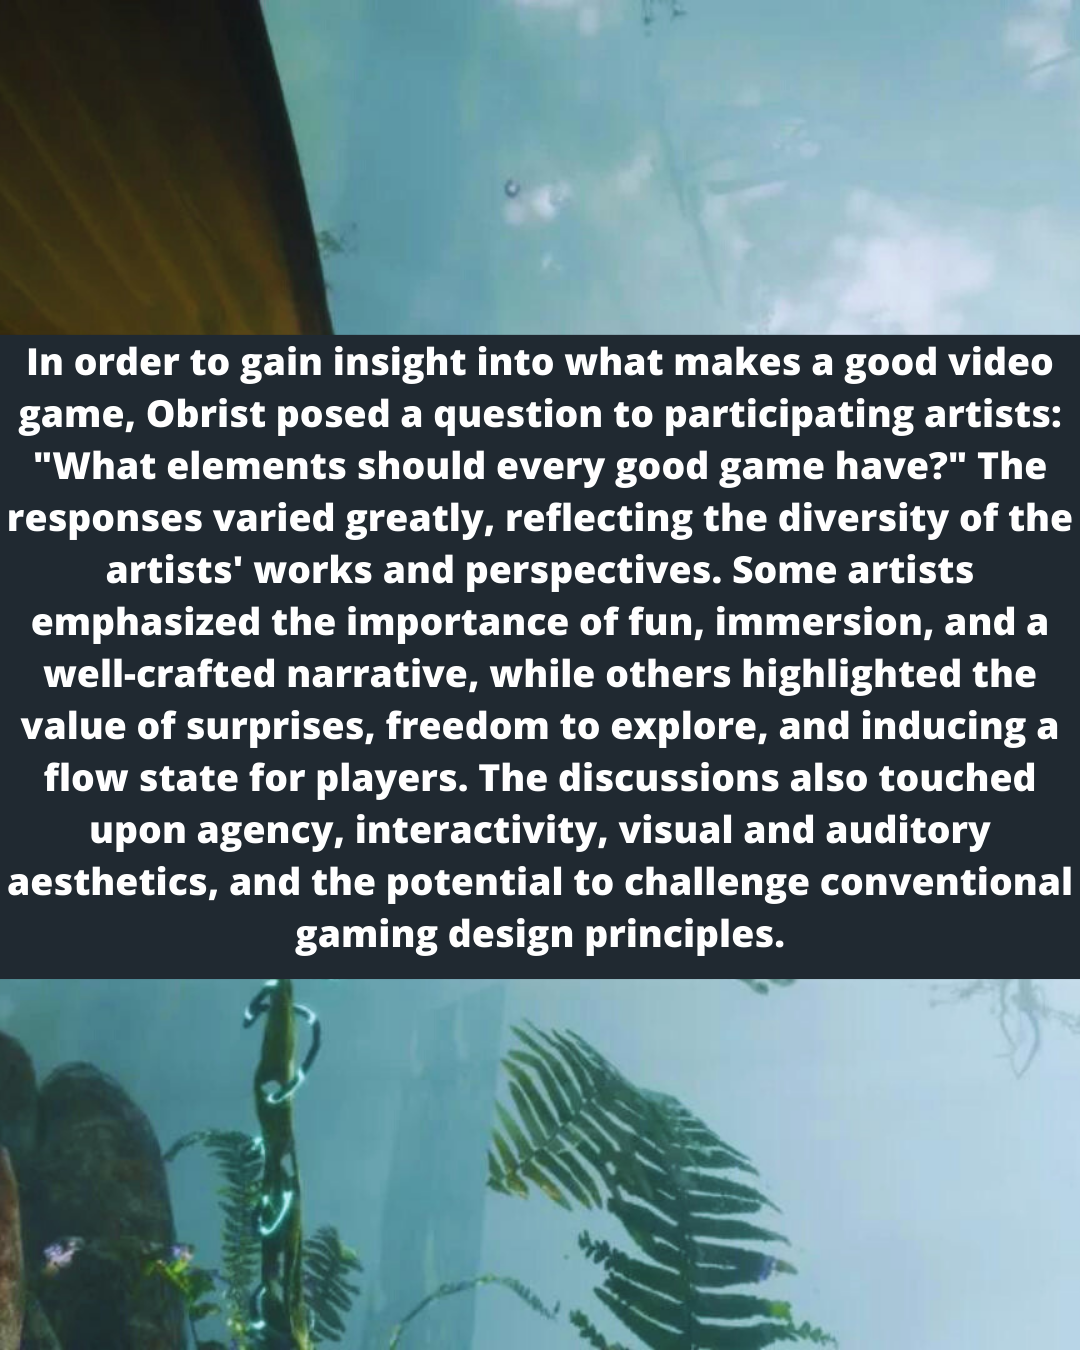 In order to gain insight into what makes a good video
game, Obrist posed a question to participating artists:
"What elements should every good game have?" The
responses varied greatly, reflecting the diversity of the
artists’ works and perspectives. Some artists
emphasized the importance of fun, immersion, and a
well-crafted narrative, while others highlighted the
value of surprises, freedom to explore, and inducing a
flow state for players. The discussions also touched
upon agency, interactivity, visual and auditory
aesthetics, and the potential to challenge conventional
gaming design principles.